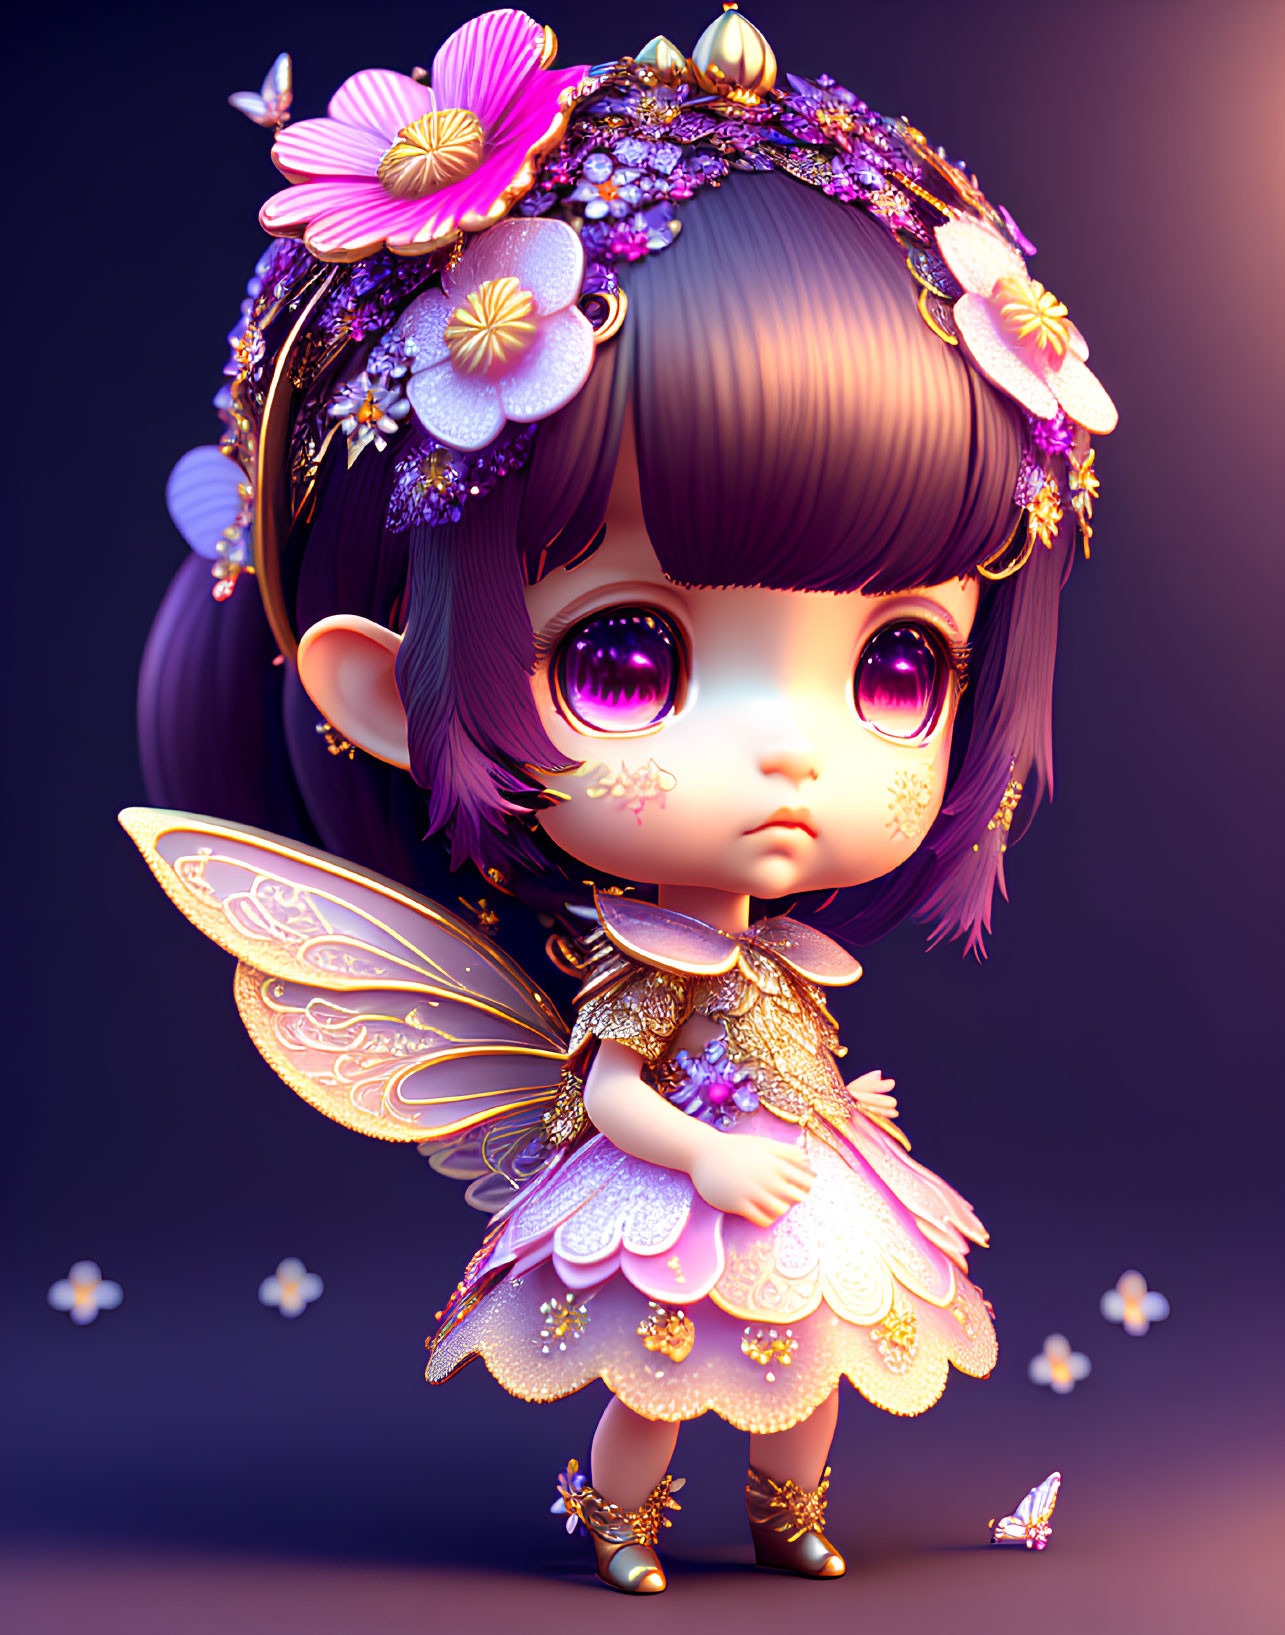 Cartoon fairy with purple eyes, floral headpiece, sparkly dress, wings, and butterflies.